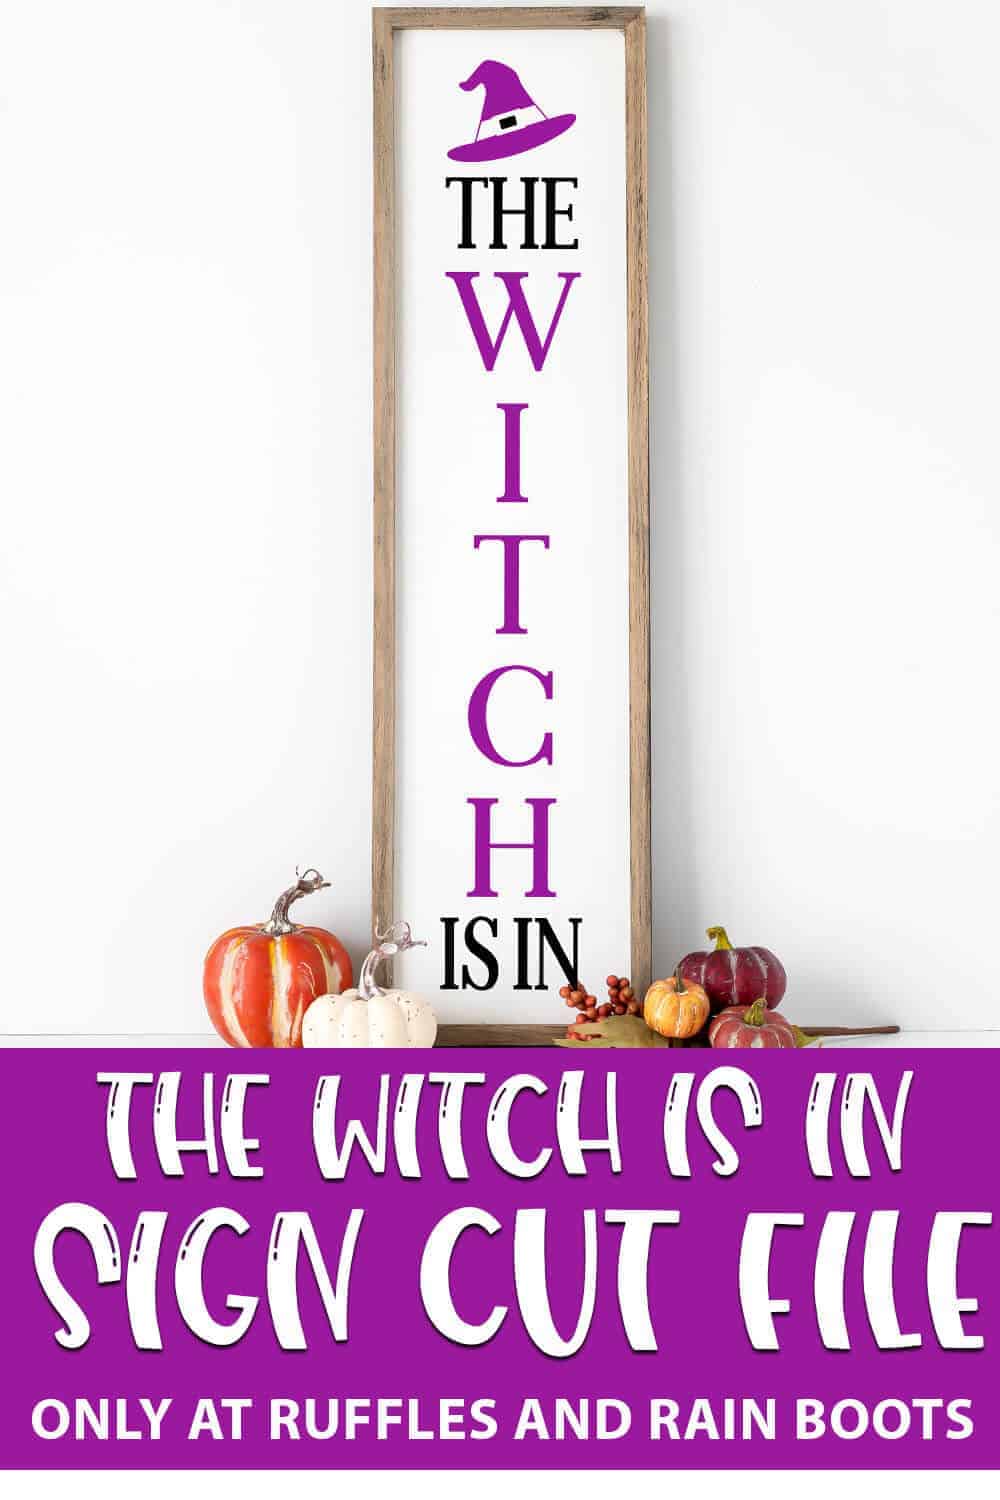 The Witch Is In vertical cut file for porch sign with text which reads the witch is in sign cut file